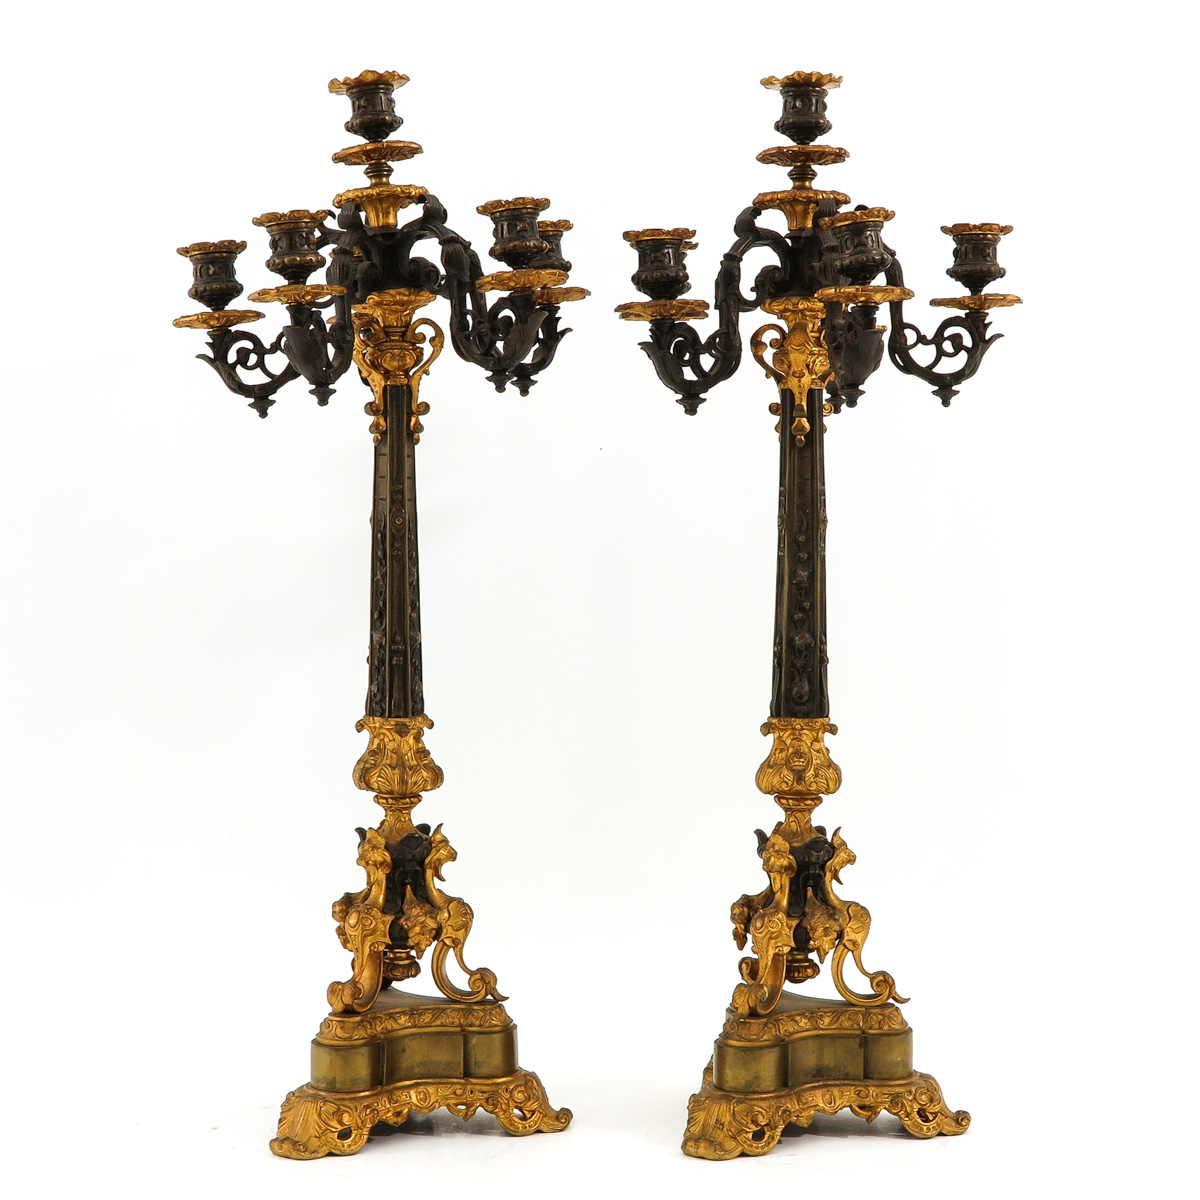 A Pair of Candlesticks - Image 4 of 9